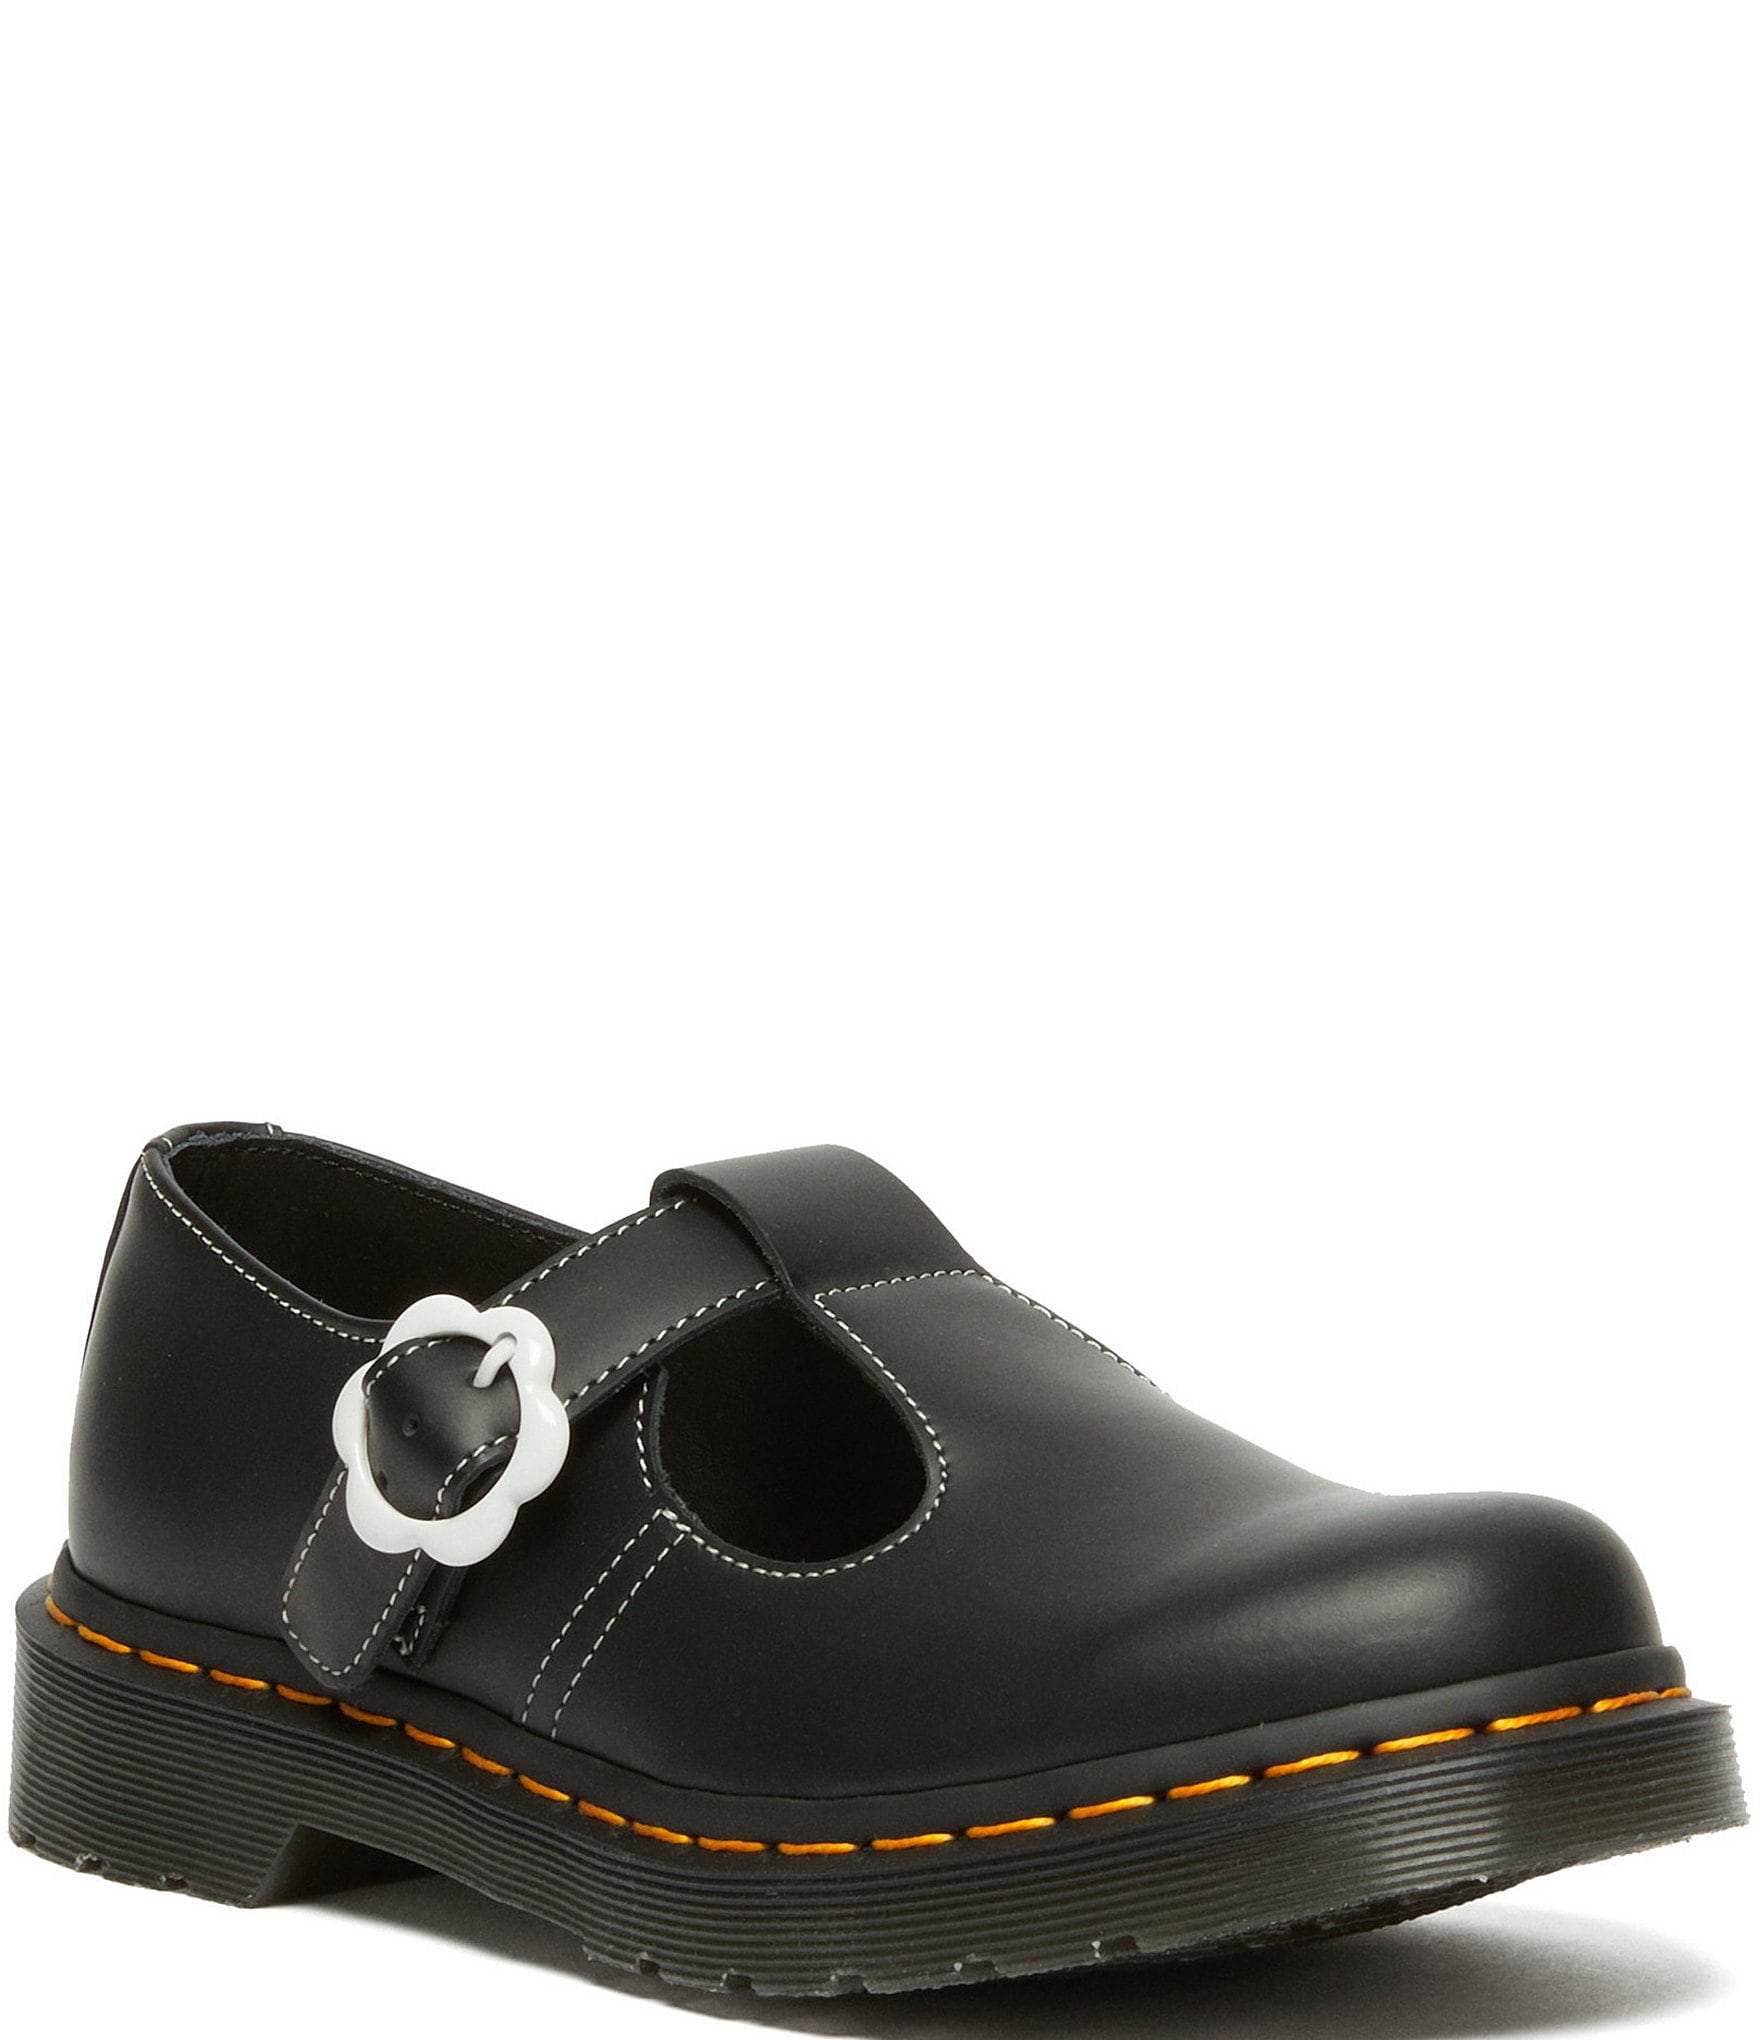 Dr. Martens Polley Flower Leather Mary Janes | Dillard's